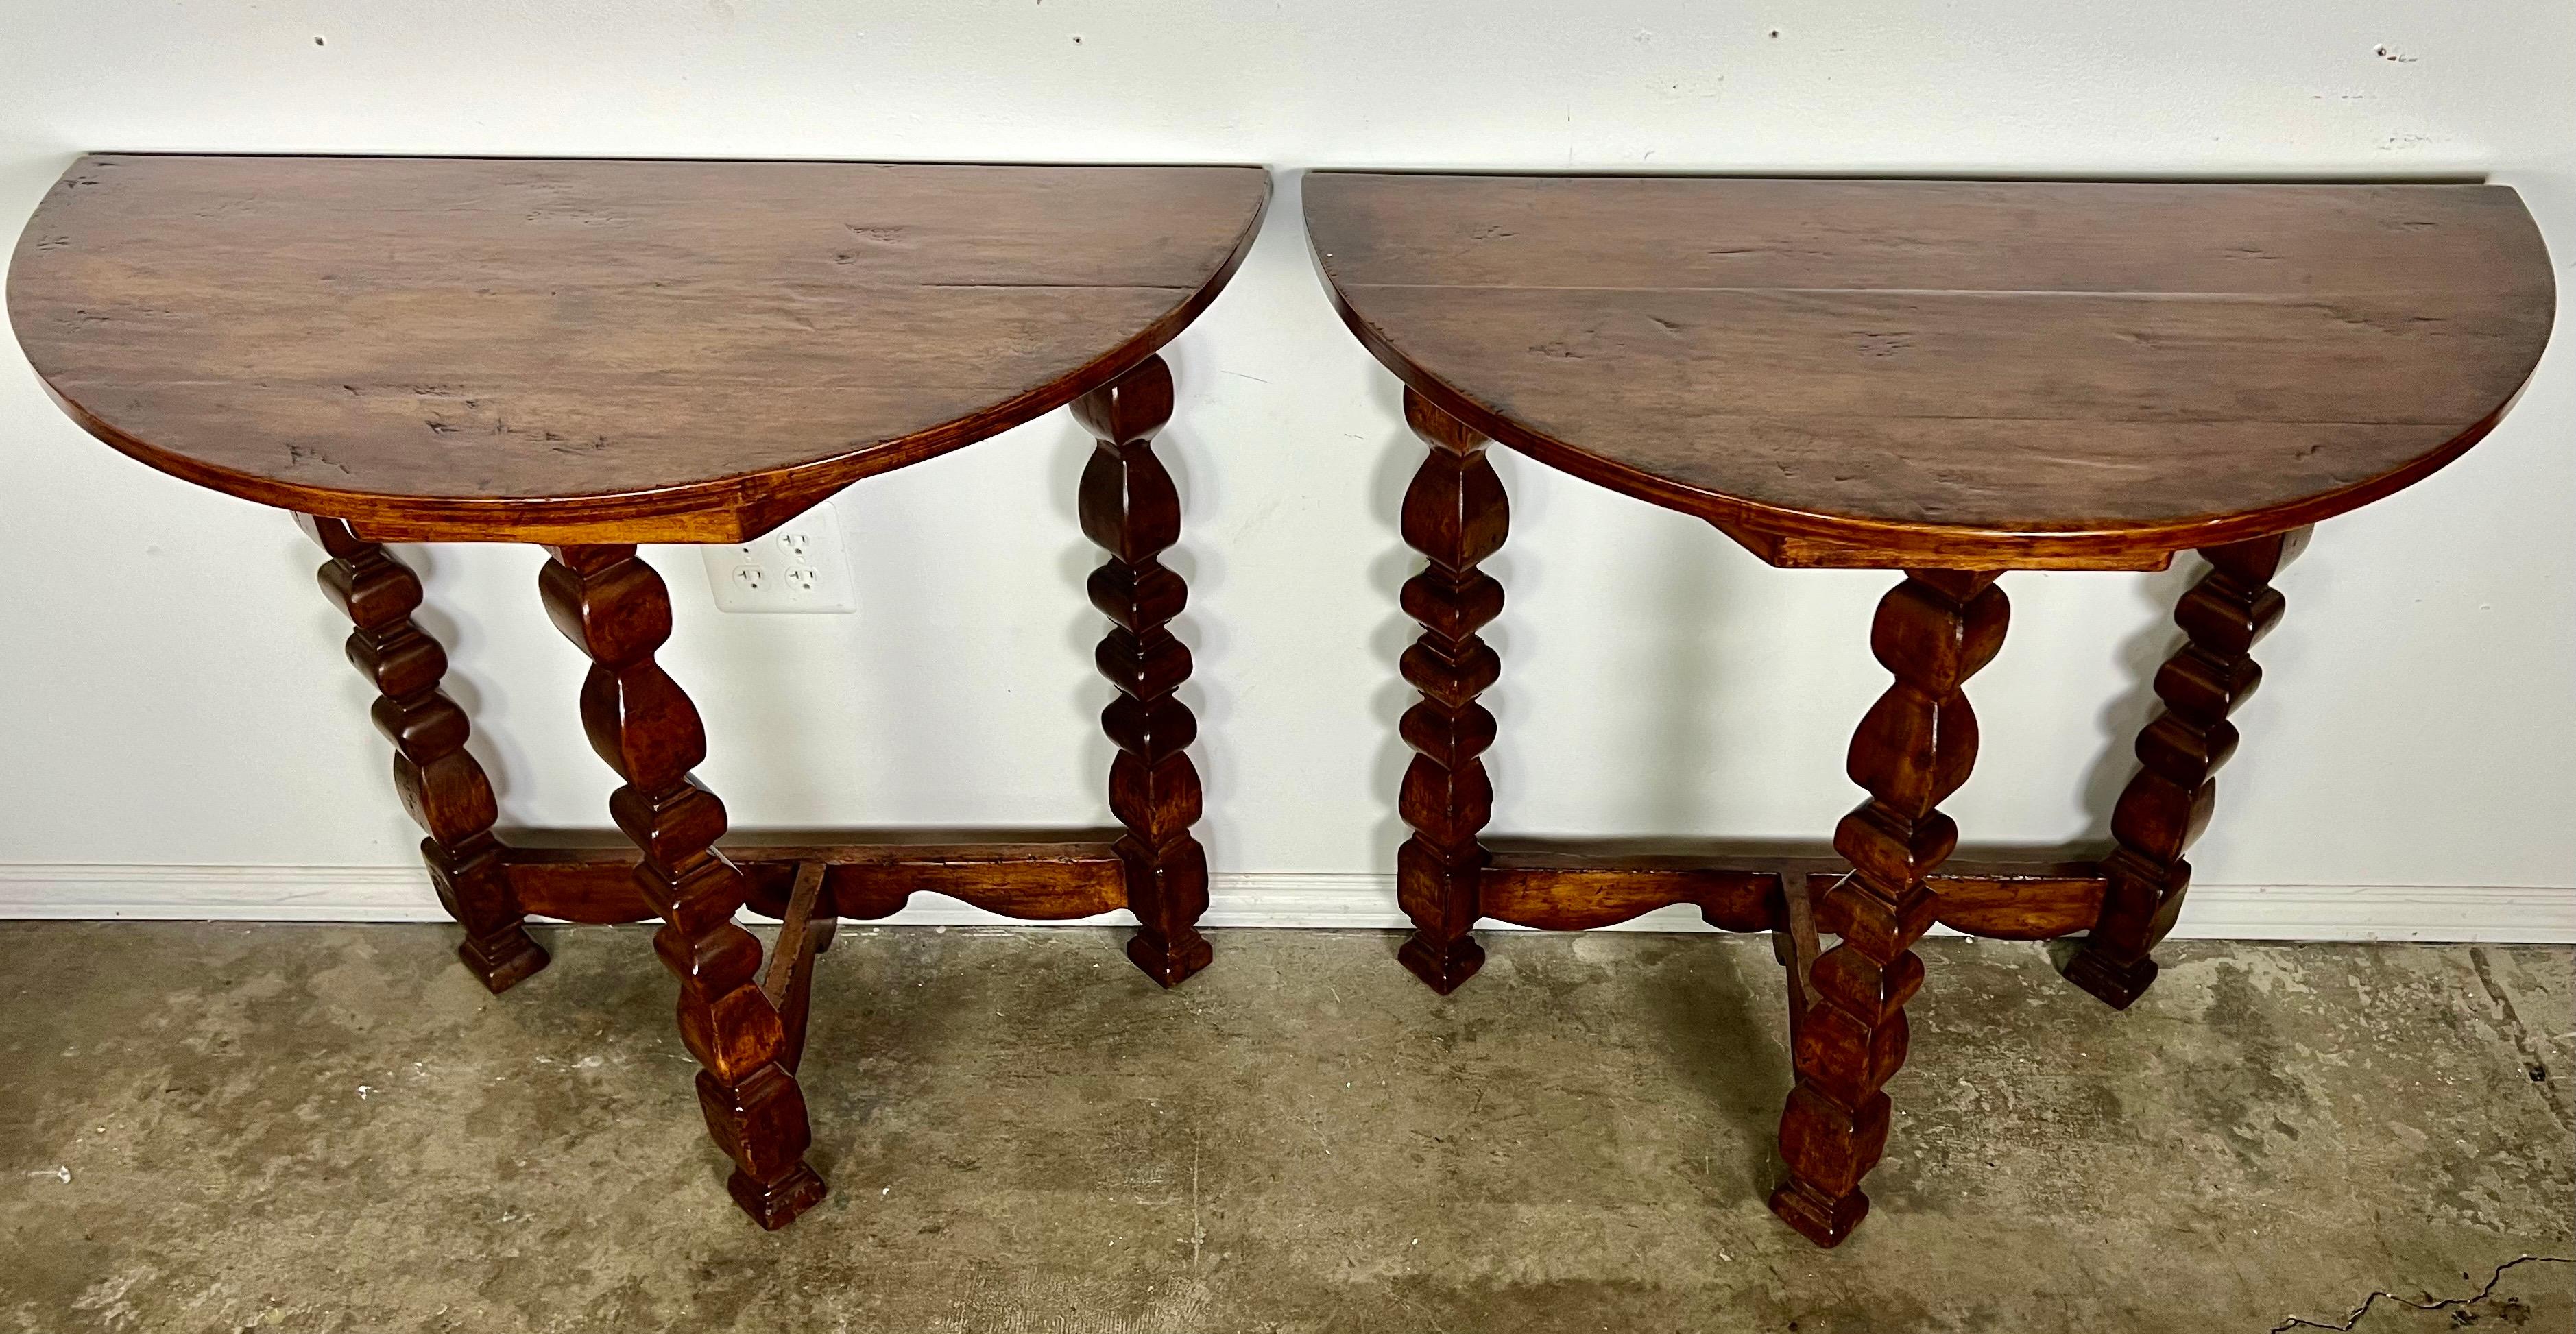 Mid-20th Century Pair of Italian Walnut Demi-Lune Tables C. 1930's For Sale